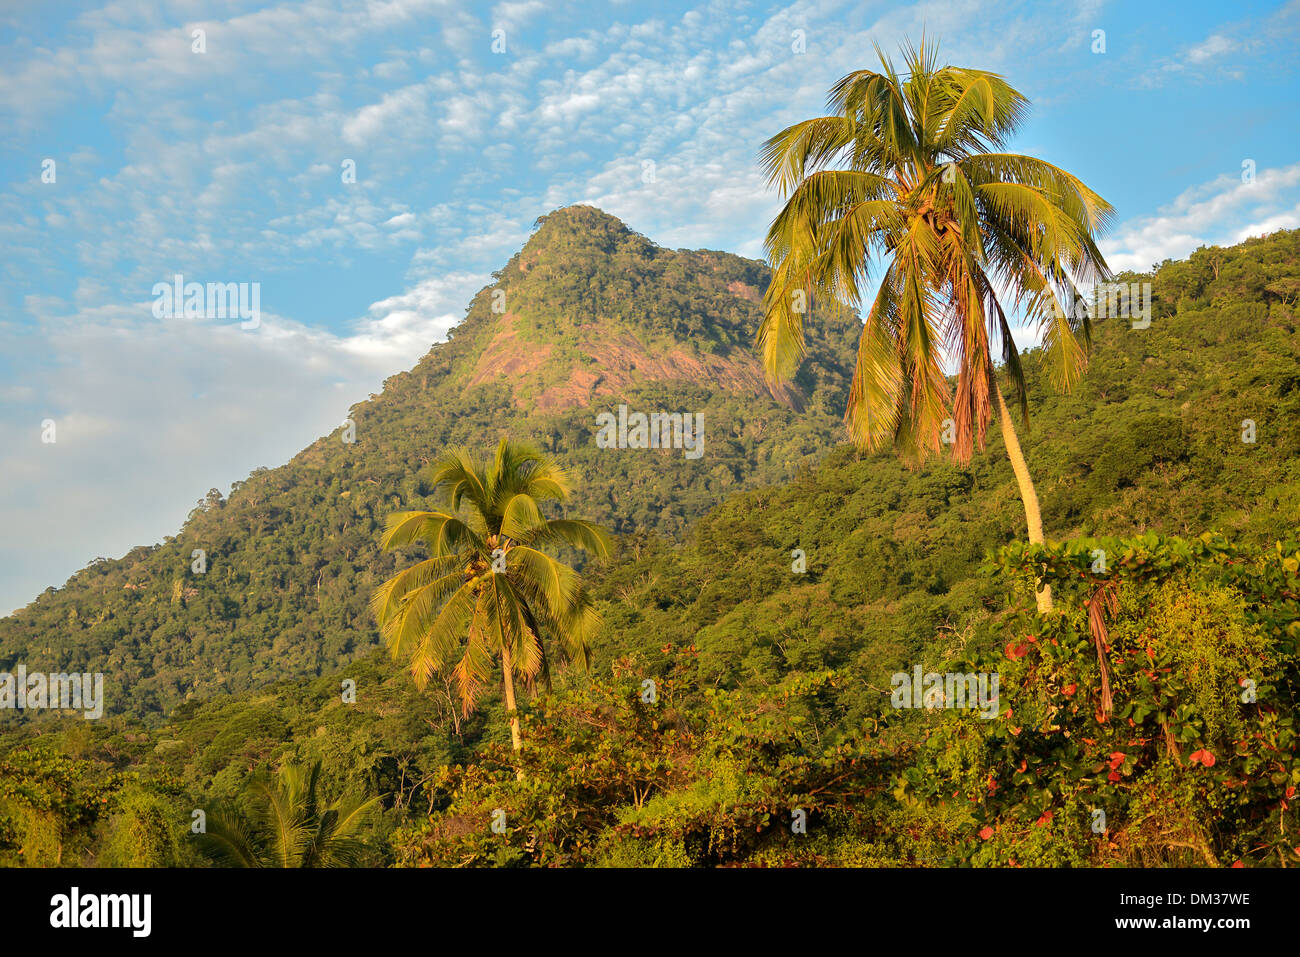 South America, Brazil, Ilha Grande, forest, palms, jungle, mountains, tropical, landscape, no people, nature Stock Photo